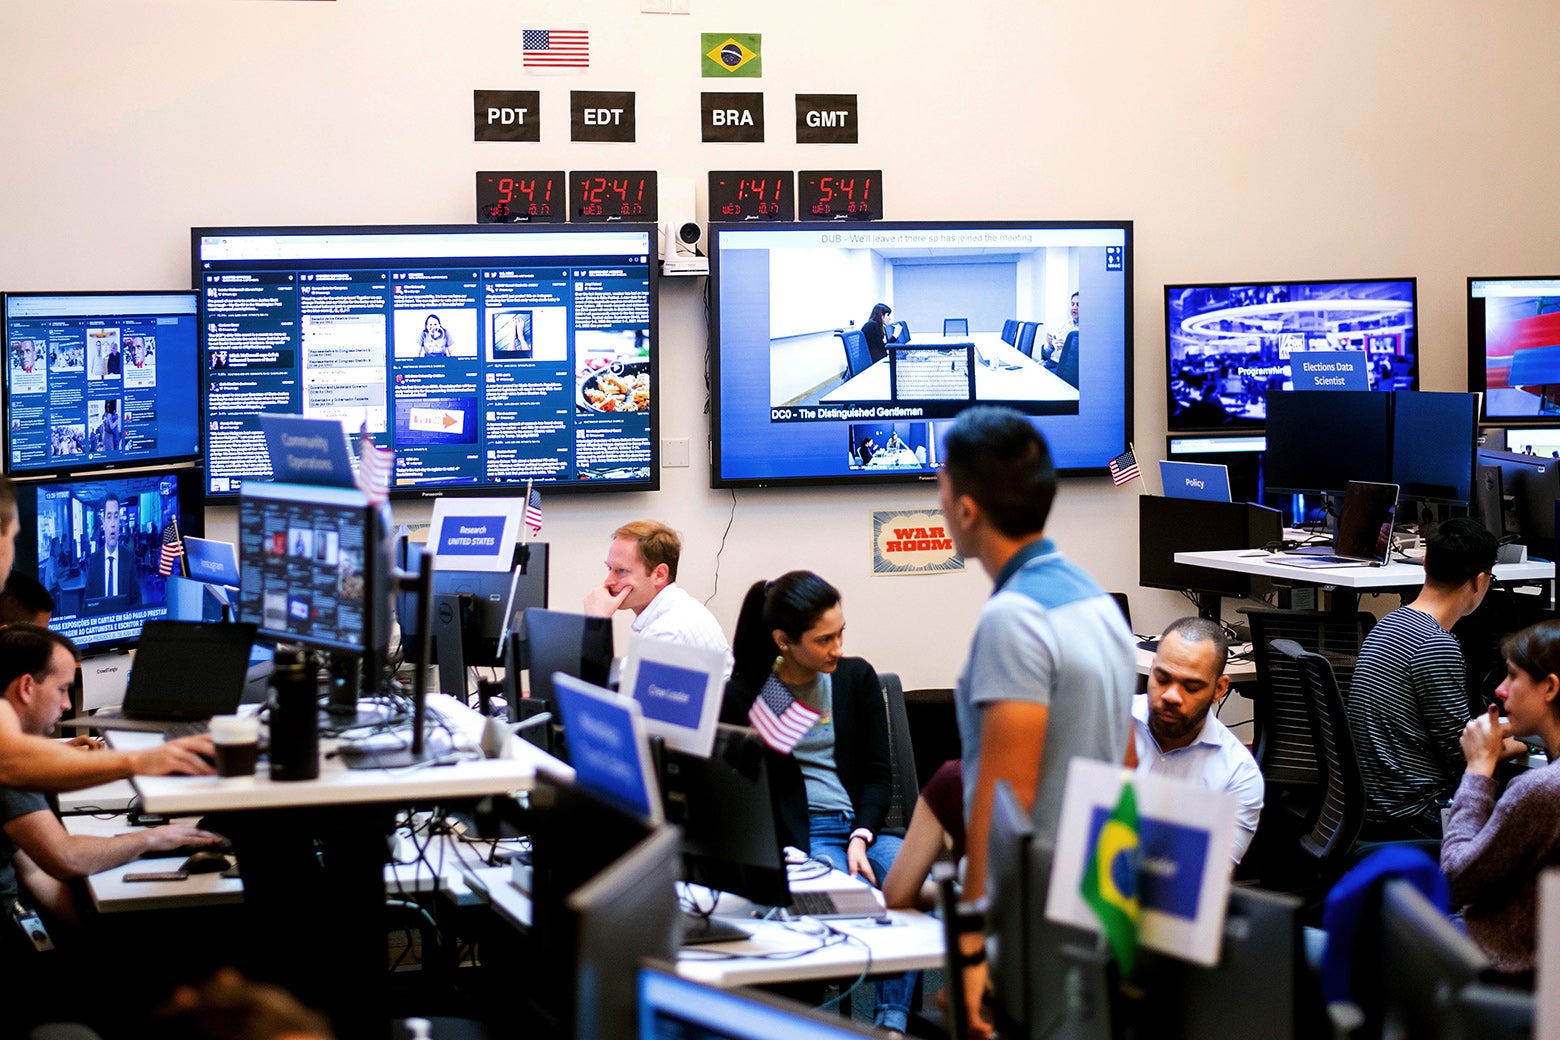 Employees work in Facebook’s “War Room” during a media demonstration.